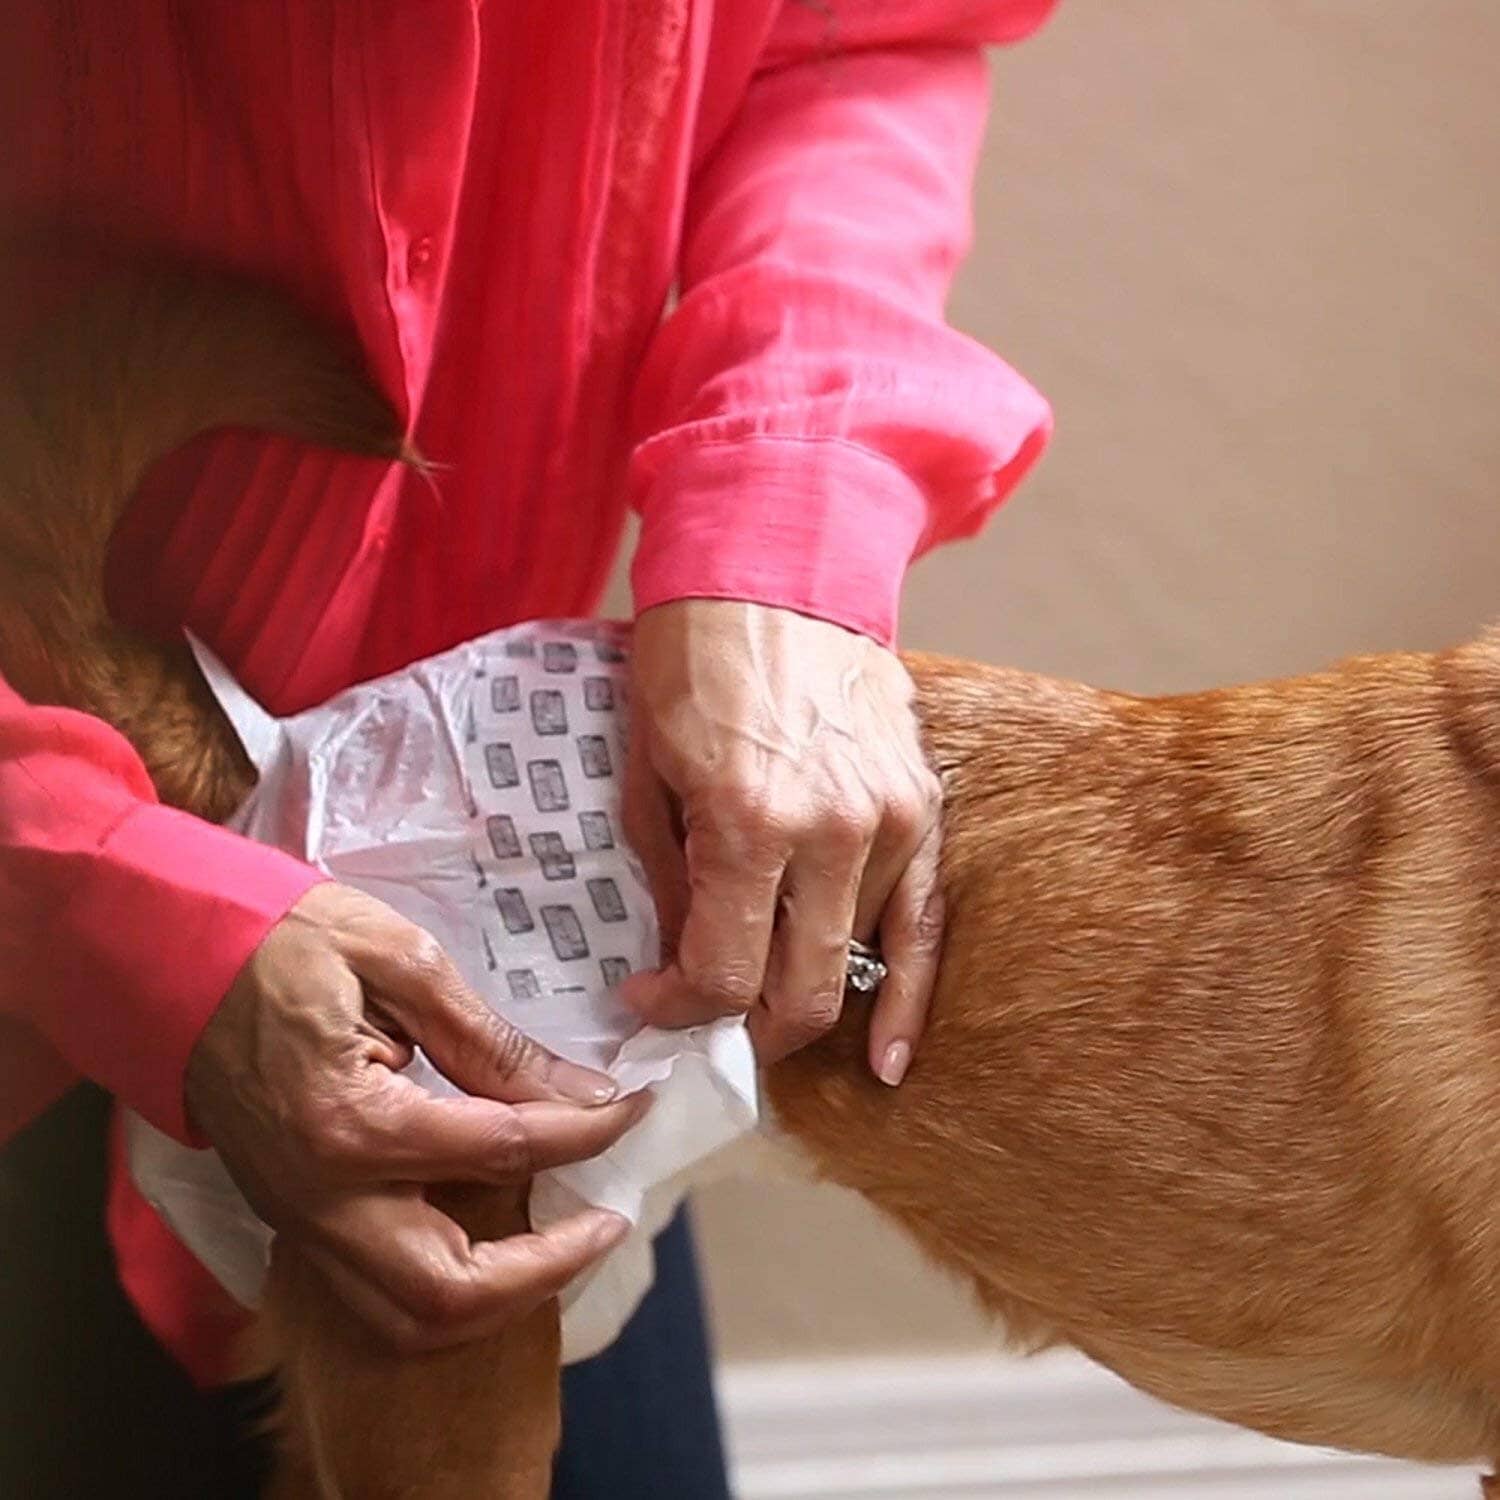 Disposable Diapers For Dogs